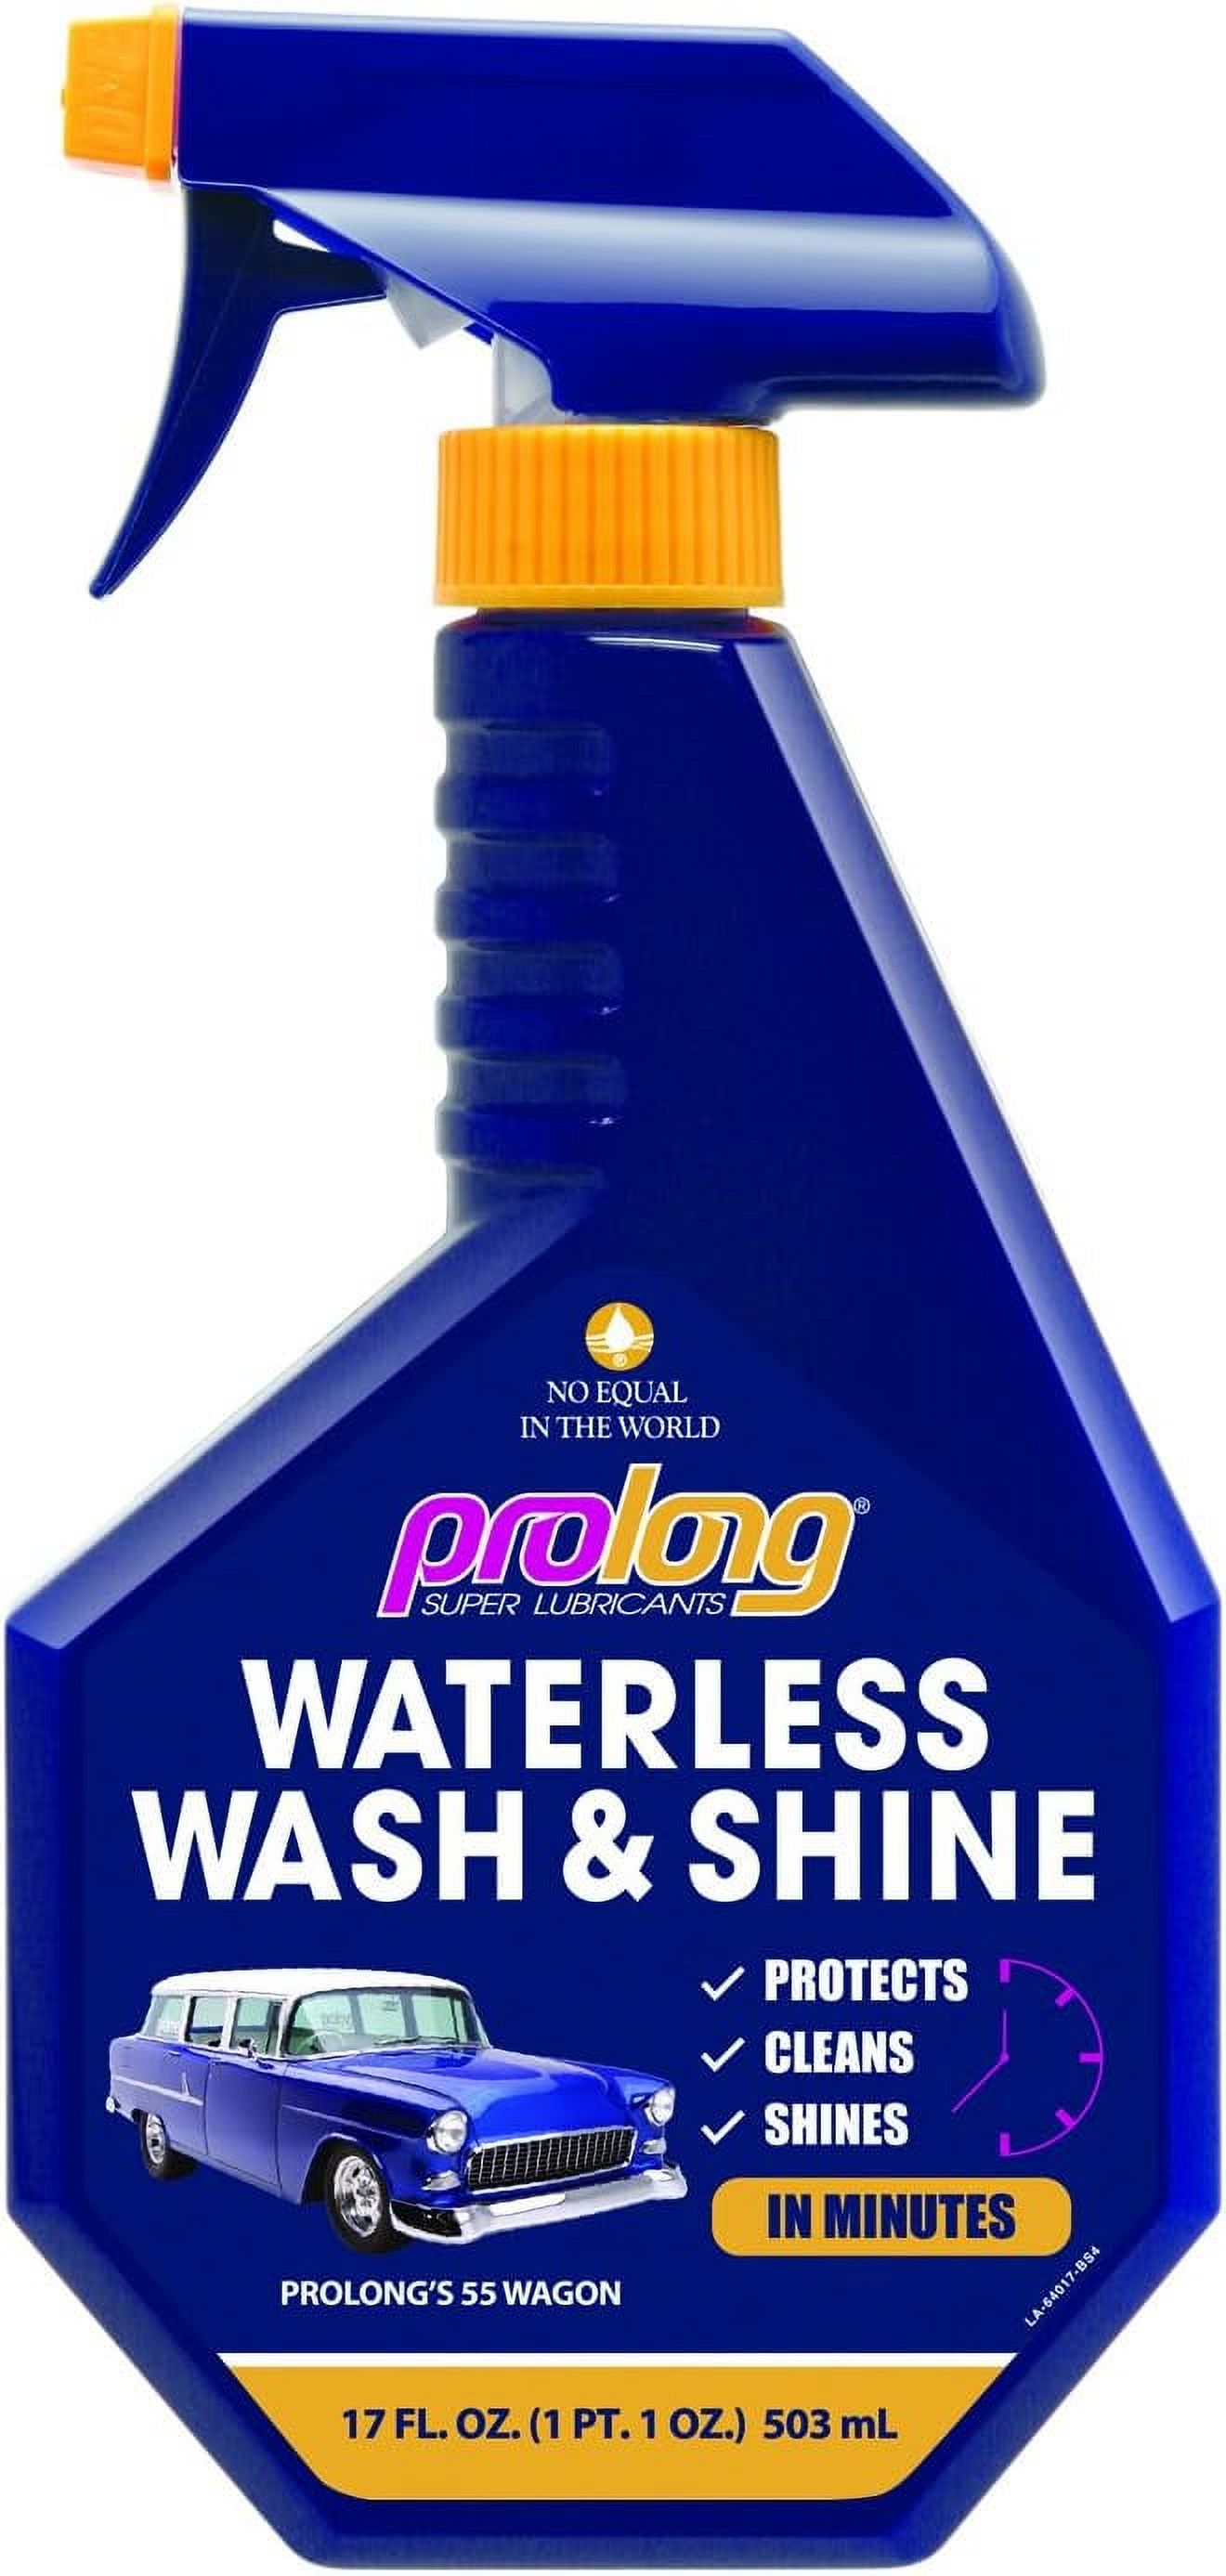 Prolong Super Lubricants PSL Waterless Wash and Shine - 17 oz. 17 Ounce - image 1 of 5